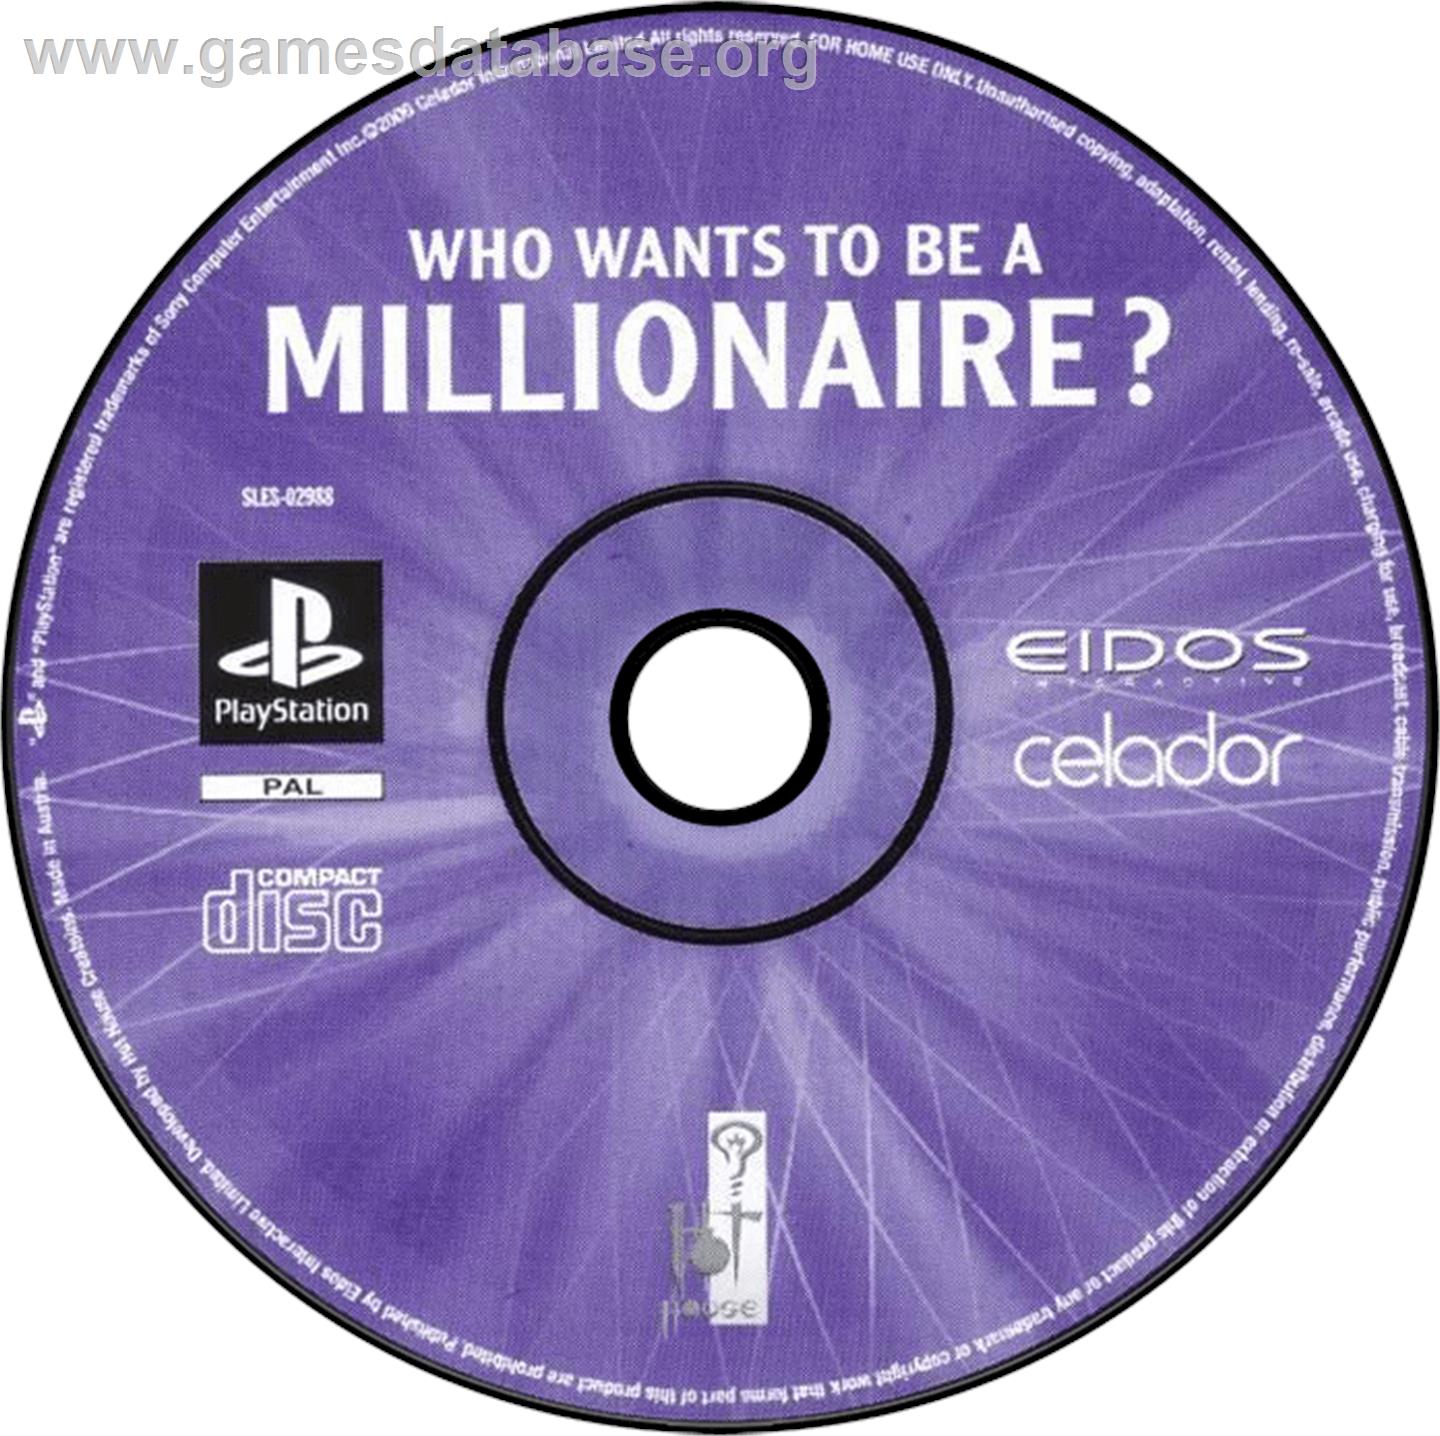 Who Wants To Be A Millionaire - Sony Playstation - Artwork - Disc